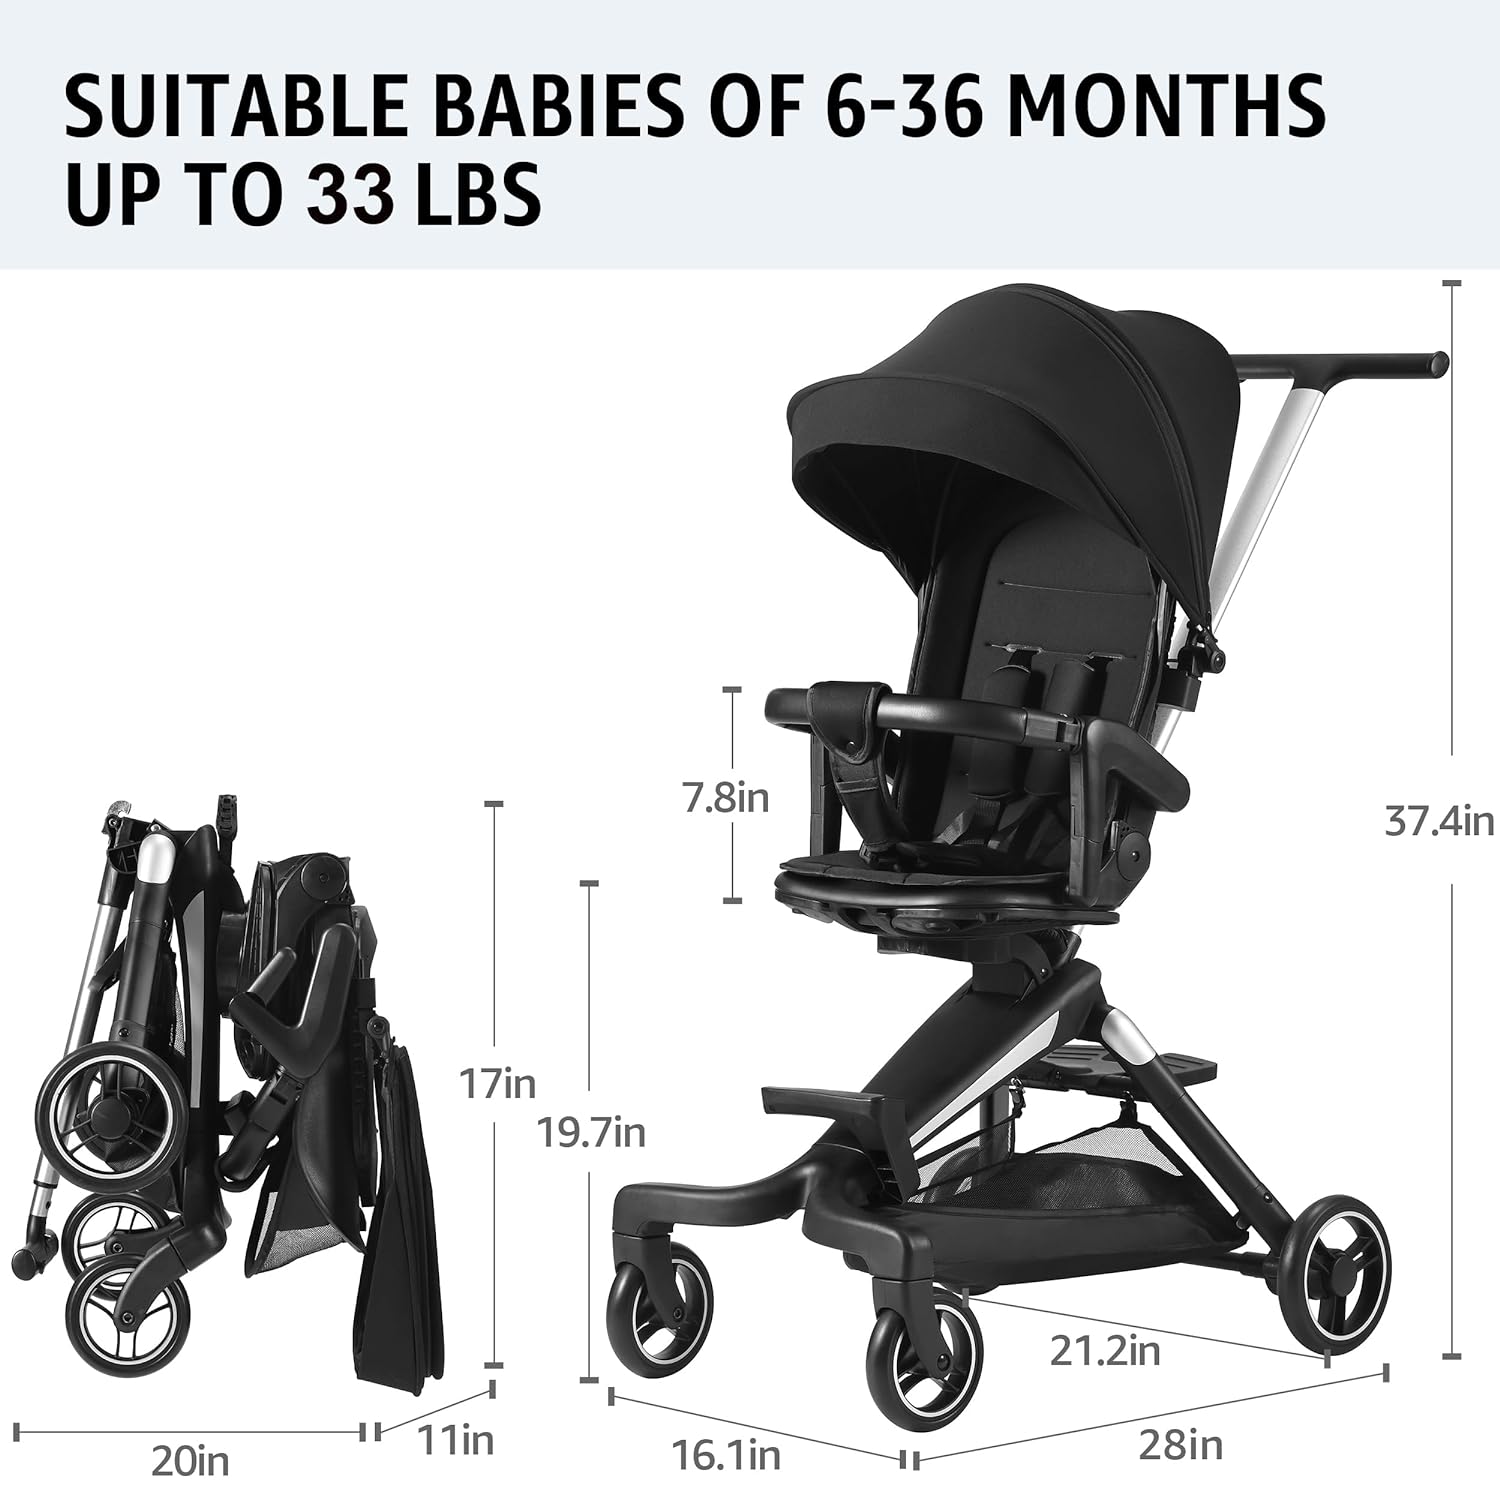 Lightweight Stroller, Convenience Stroller with 360 Degree Rotational Seat, Baby Toddler Stroller for Travel, Multi Position Recline, Ultra Compact Fold  Airplane Ready Travel Stroller - Lightweight Stroller Review